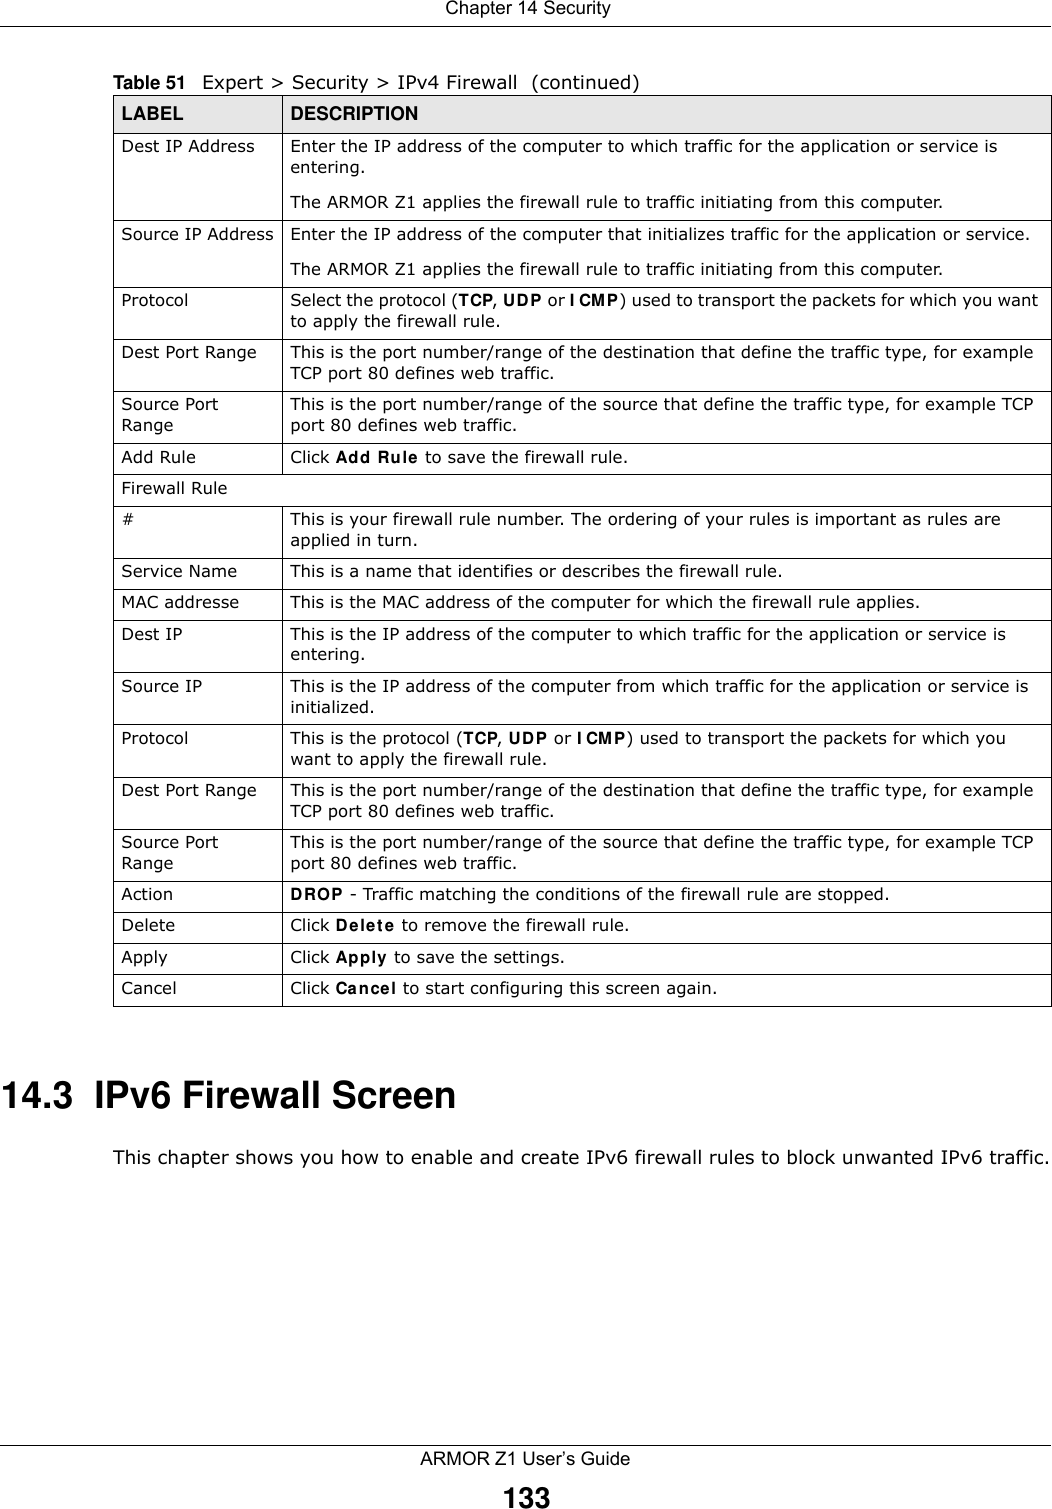  Chapter 14 SecurityARMOR Z1 User’s Guide13314.3  IPv6 Firewall Screen This chapter shows you how to enable and create IPv6 firewall rules to block unwanted IPv6 traffic.Dest IP Address Enter the IP address of the computer to which traffic for the application or service is entering. The ARMOR Z1 applies the firewall rule to traffic initiating from this computer. Source IP Address Enter the IP address of the computer that initializes traffic for the application or service.The ARMOR Z1 applies the firewall rule to traffic initiating from this computer.Protocol  Select the protocol (TCP, UDP or ICMP) used to transport the packets for which you want to apply the firewall rule.Dest Port Range This is the port number/range of the destination that define the traffic type, for example TCP port 80 defines web traffic.Source Port RangeThis is the port number/range of the source that define the traffic type, for example TCP port 80 defines web traffic.Add Rule Click Add Rule to save the firewall rule. Firewall Rule# This is your firewall rule number. The ordering of your rules is important as rules are applied in turn. Service Name This is a name that identifies or describes the firewall rule.MAC addresse This is the MAC address of the computer for which the firewall rule applies.Dest IP This is the IP address of the computer to which traffic for the application or service is entering. Source IP This is the IP address of the computer from which traffic for the application or service is initialized. Protocol This is the protocol (TCP, UDP or ICMP) used to transport the packets for which you want to apply the firewall rule. Dest Port Range This is the port number/range of the destination that define the traffic type, for example TCP port 80 defines web traffic.Source Port RangeThis is the port number/range of the source that define the traffic type, for example TCP port 80 defines web traffic.Action DROP - Traffic matching the conditions of the firewall rule are stopped.Delete Click Delete to remove the firewall rule.Apply Click Apply to save the settings. Cancel Click Cancel to start configuring this screen again. Table 51   Expert &gt; Security &gt; IPv4 Firewall  (continued)LABEL DESCRIPTION